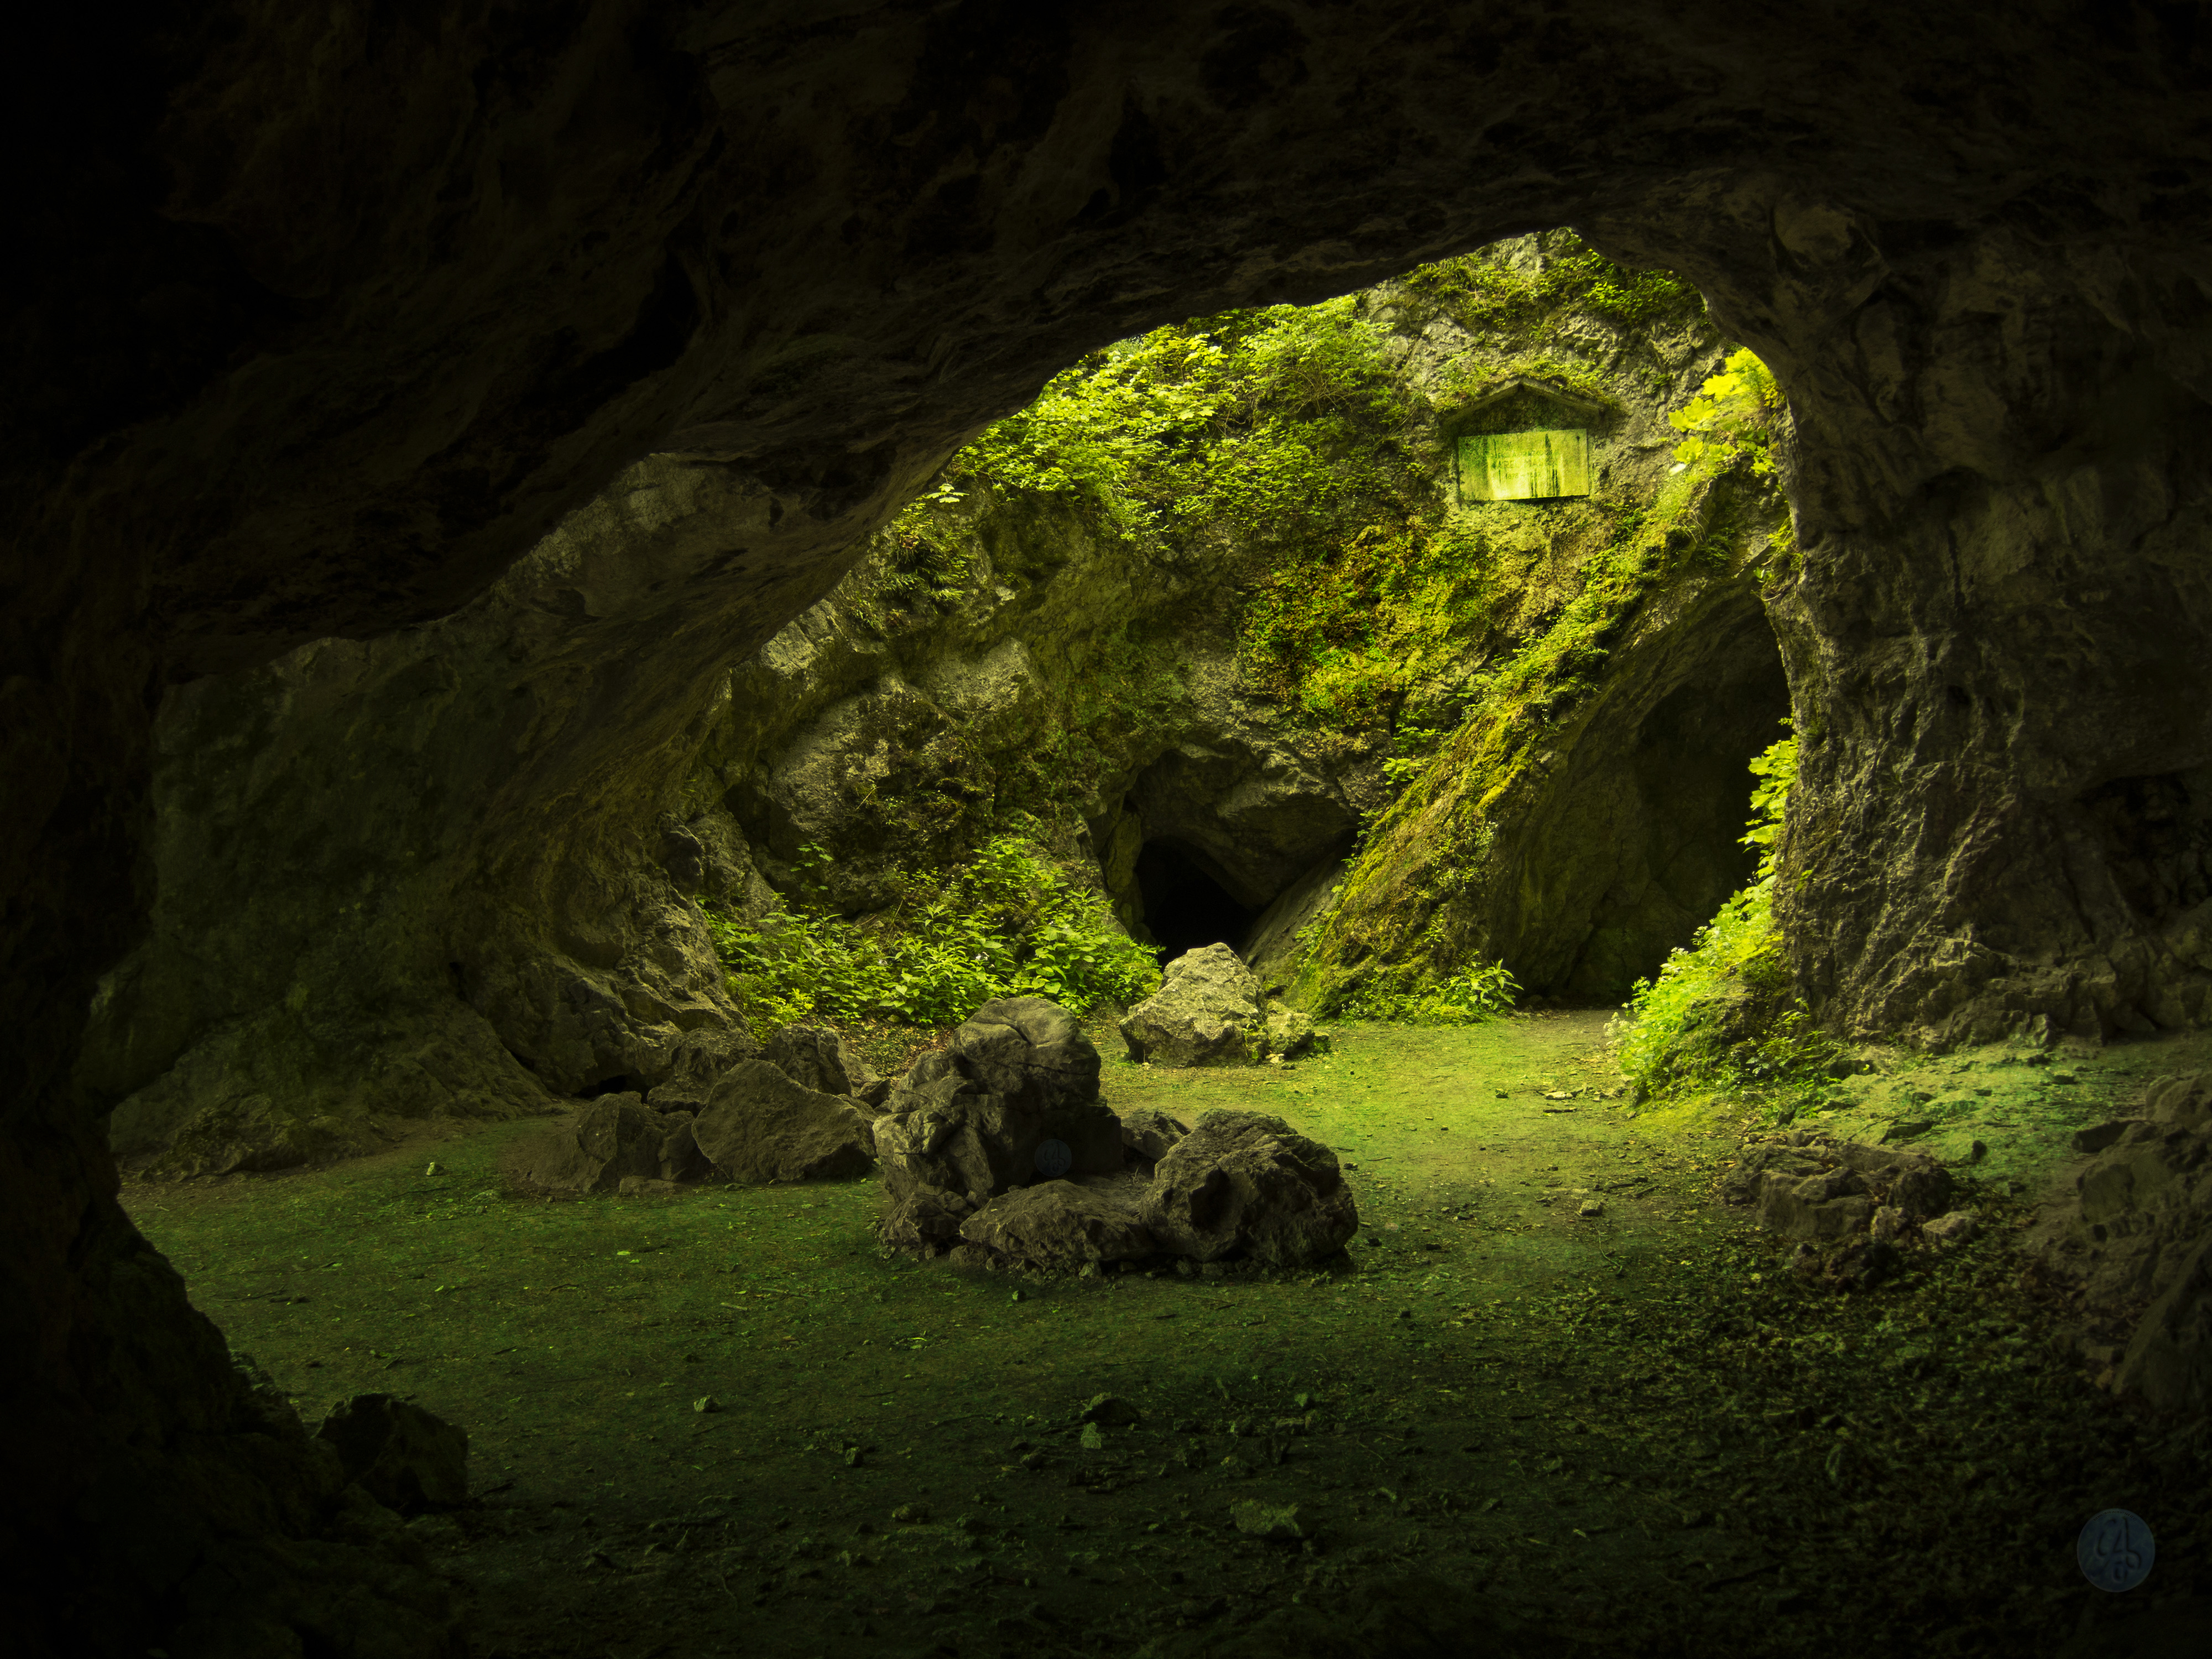 Cave Wallpaper Full Hd Free Download By Aj8 Acro On Deviantart - Riset